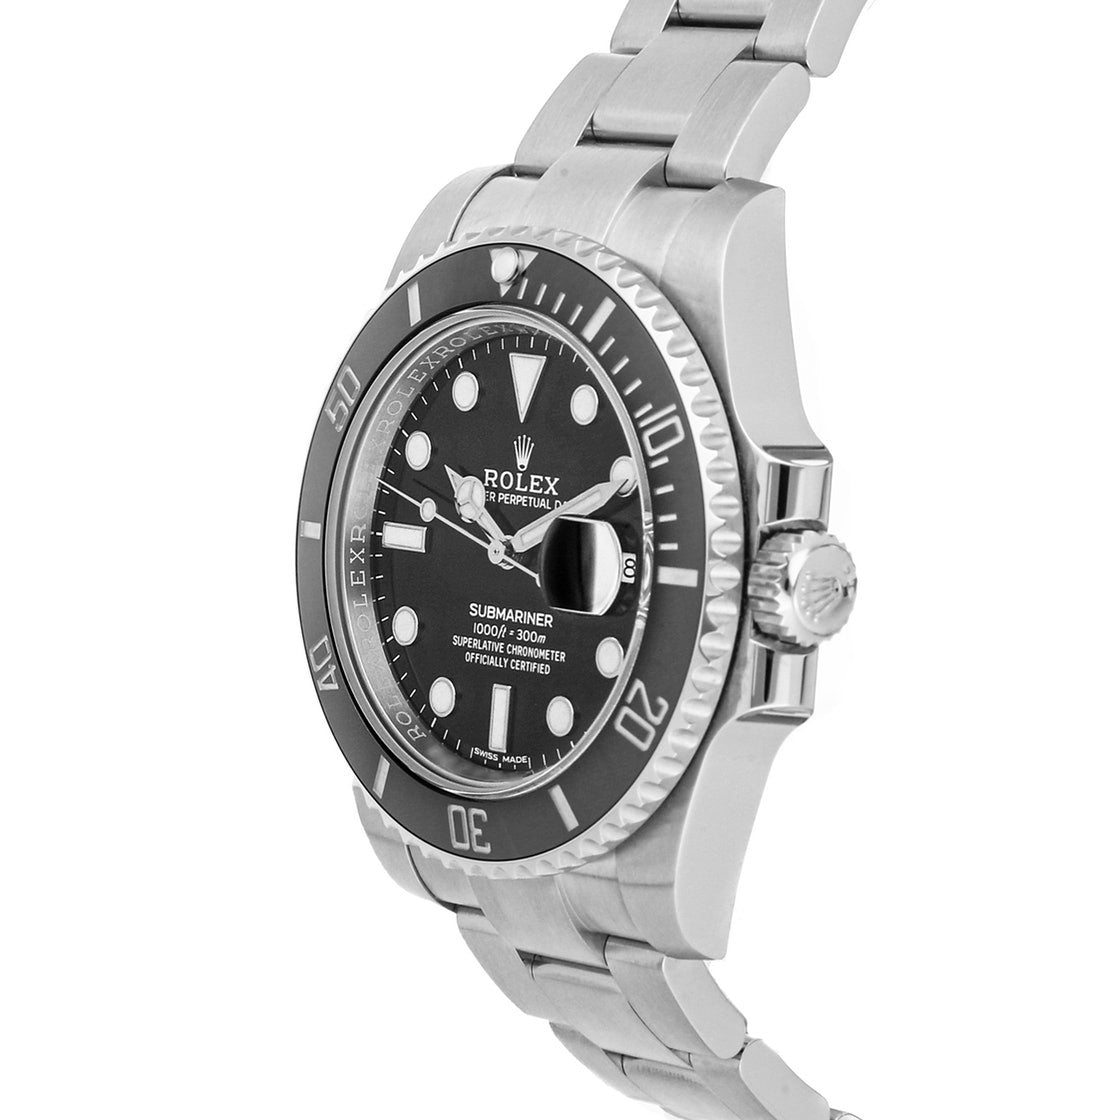 Rolex Submariner 116610LN 2017 Men's Automatic Watch Stainless W/Box & Paper